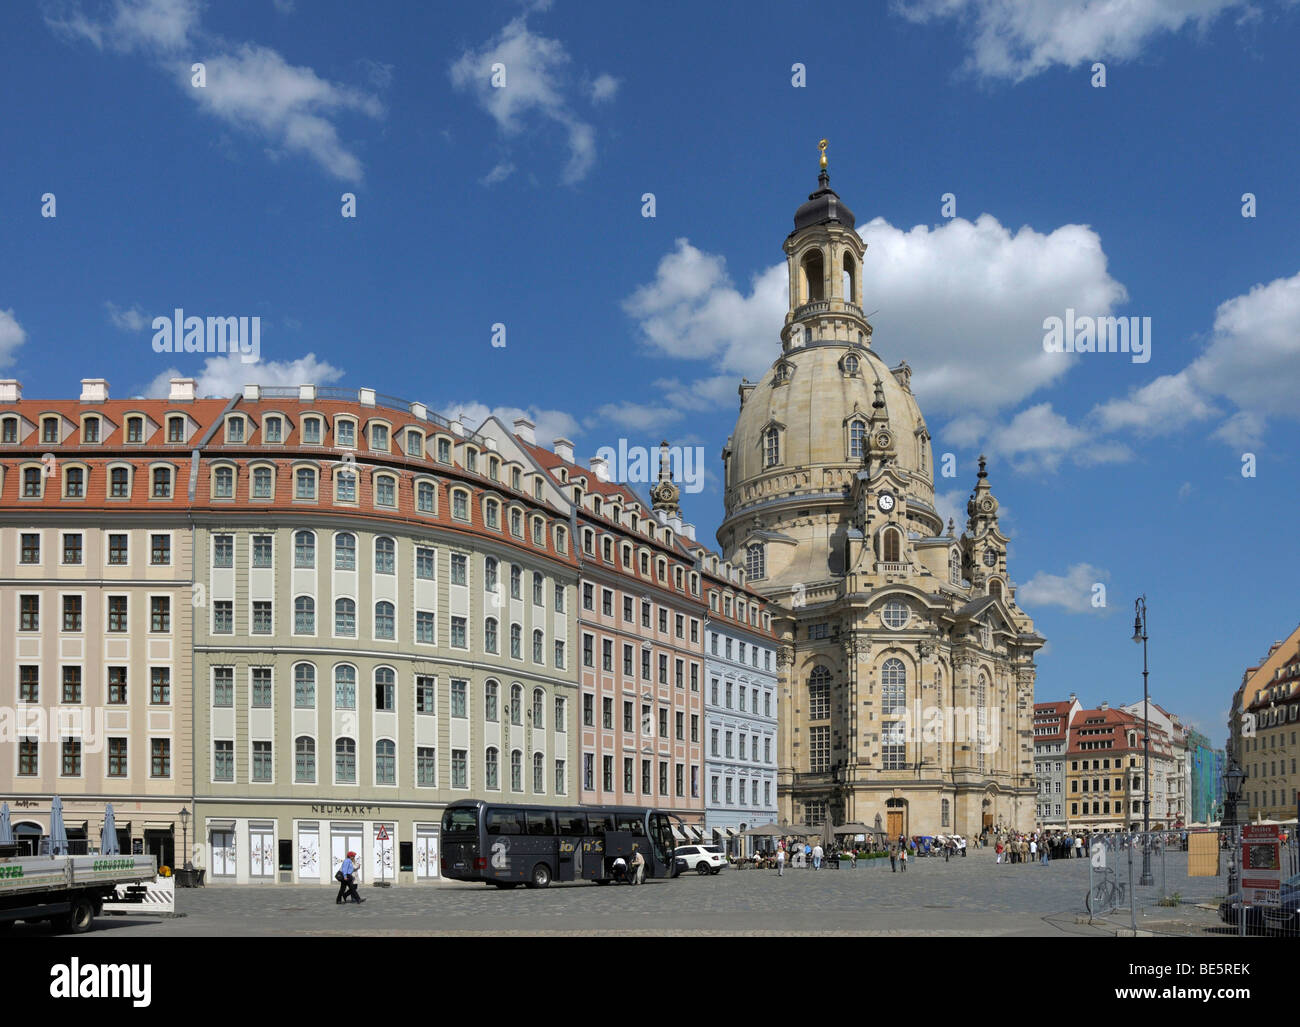 Frauenkirche Church of Our Lady, Neumarkt square, Dresden, Saxony, Germany, Europe Stock Photo